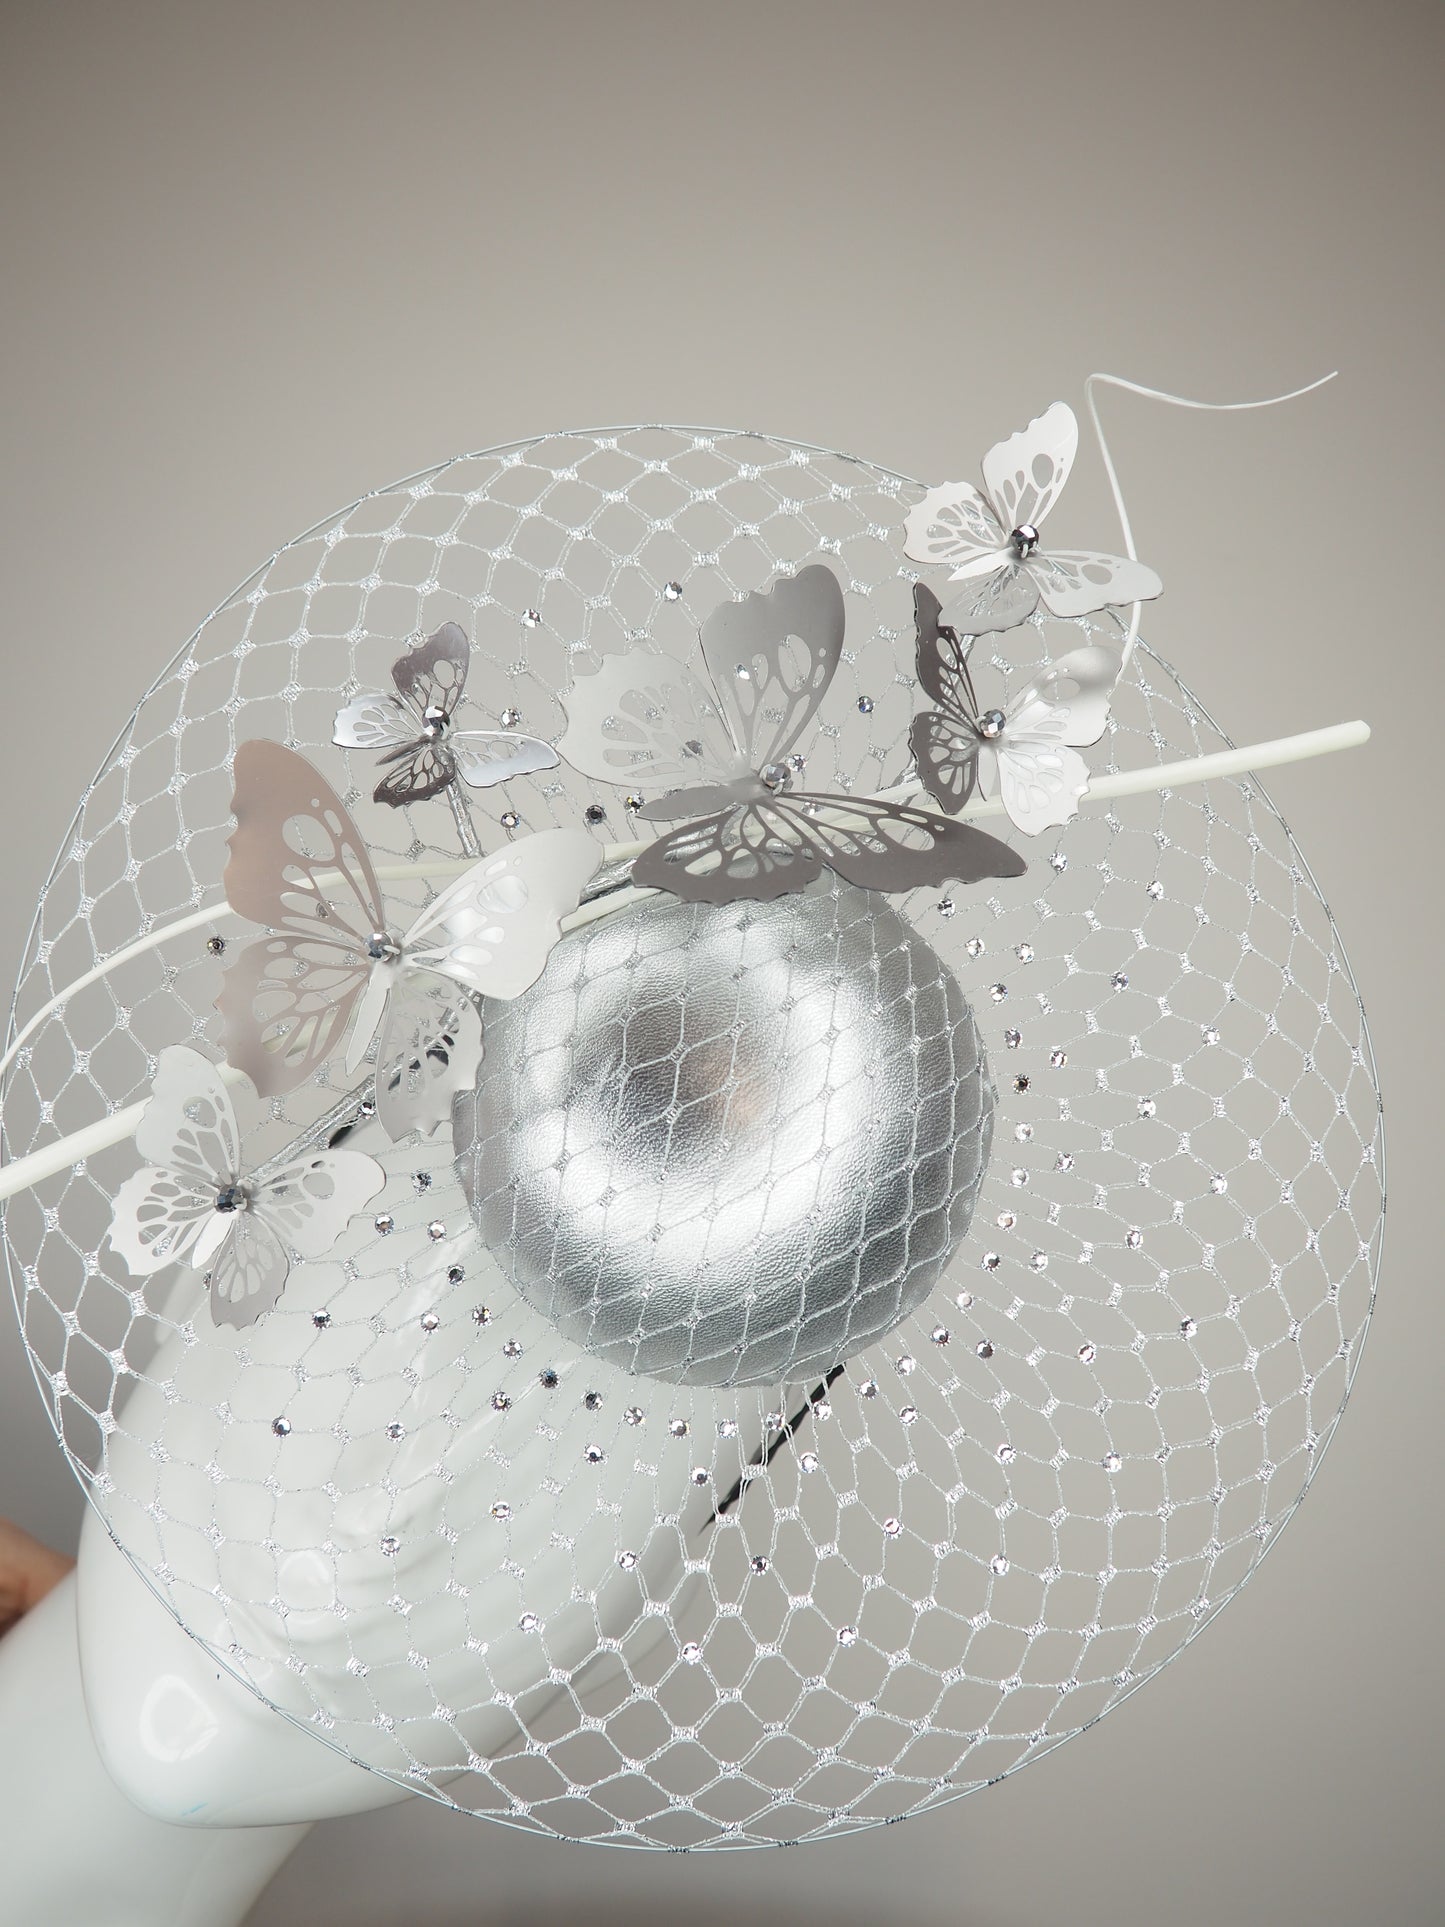 Taking Flight - Silver leather veiled percher with crystoform butterflies